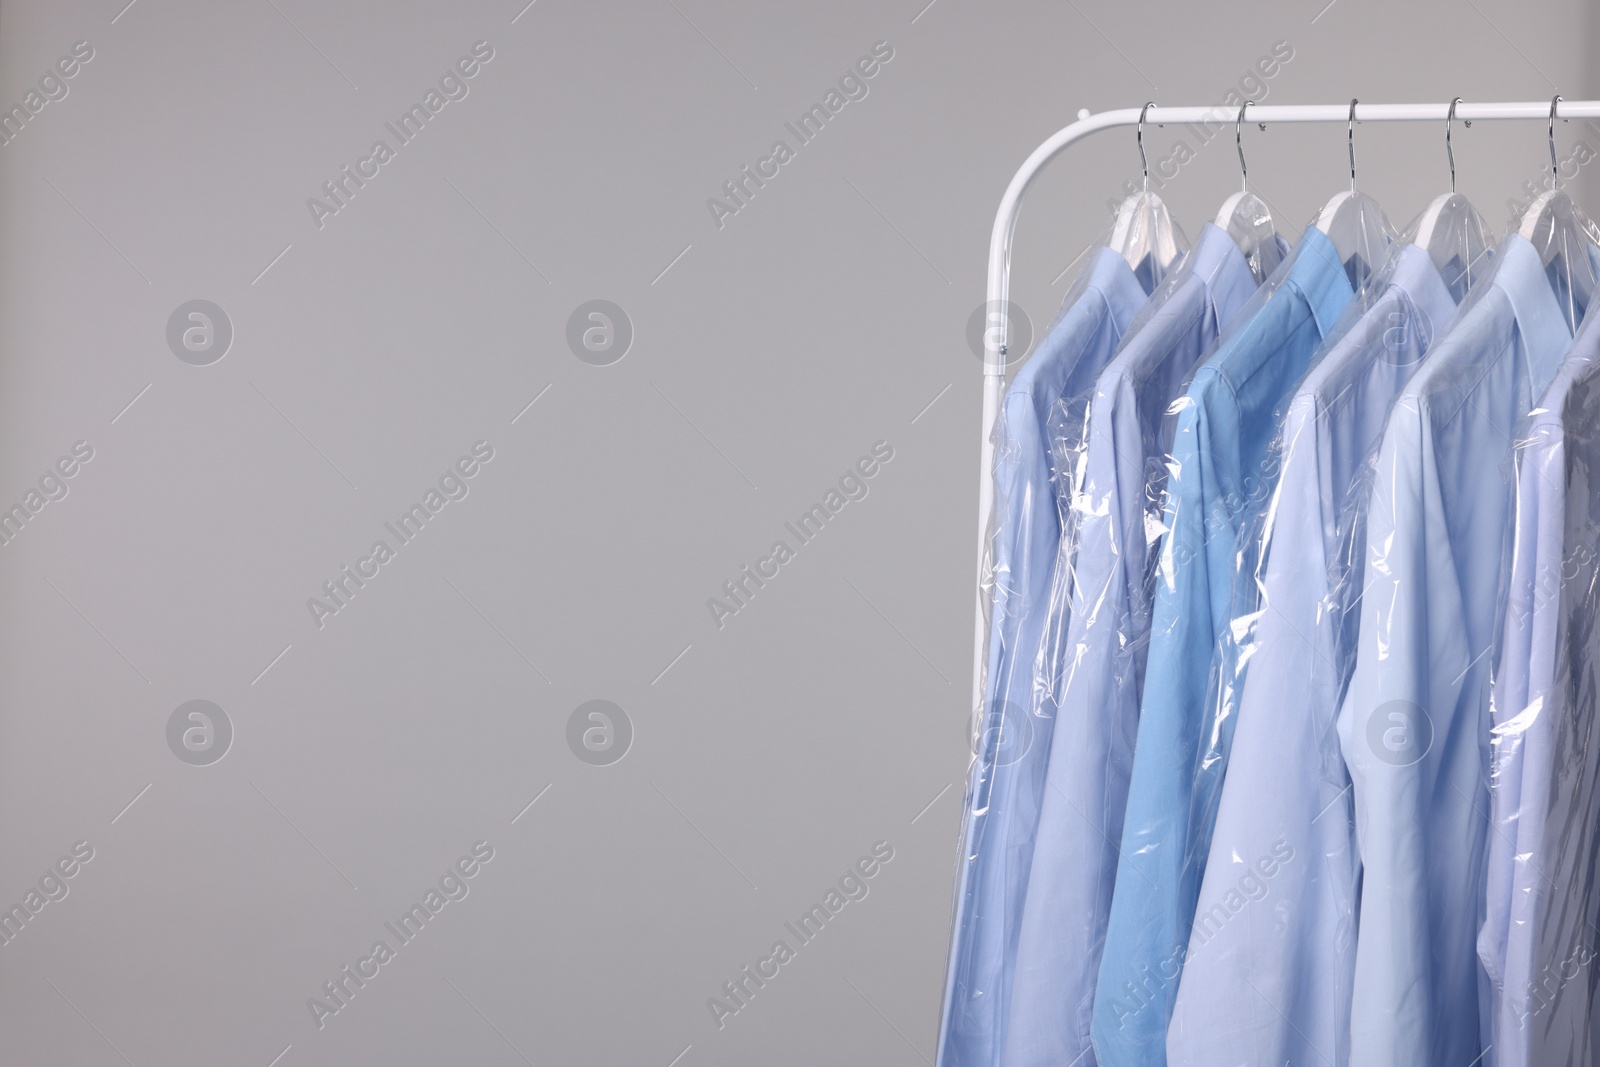 Photo of Dry-cleaning service. Many different clothes in plastic bags hanging on rack against grey background, space for text